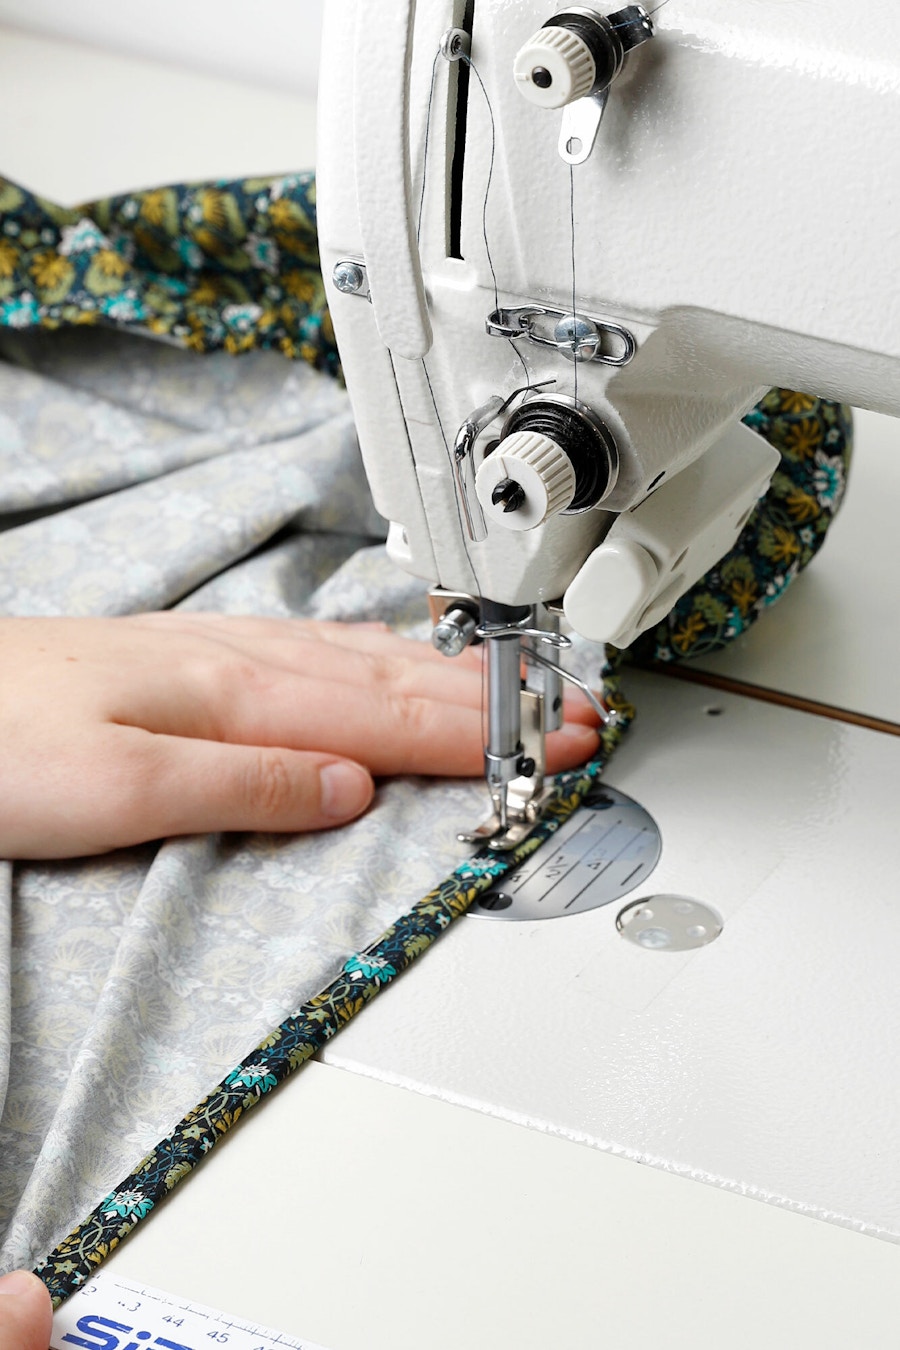 Liberty Cot Sheet Sewing Up Channel